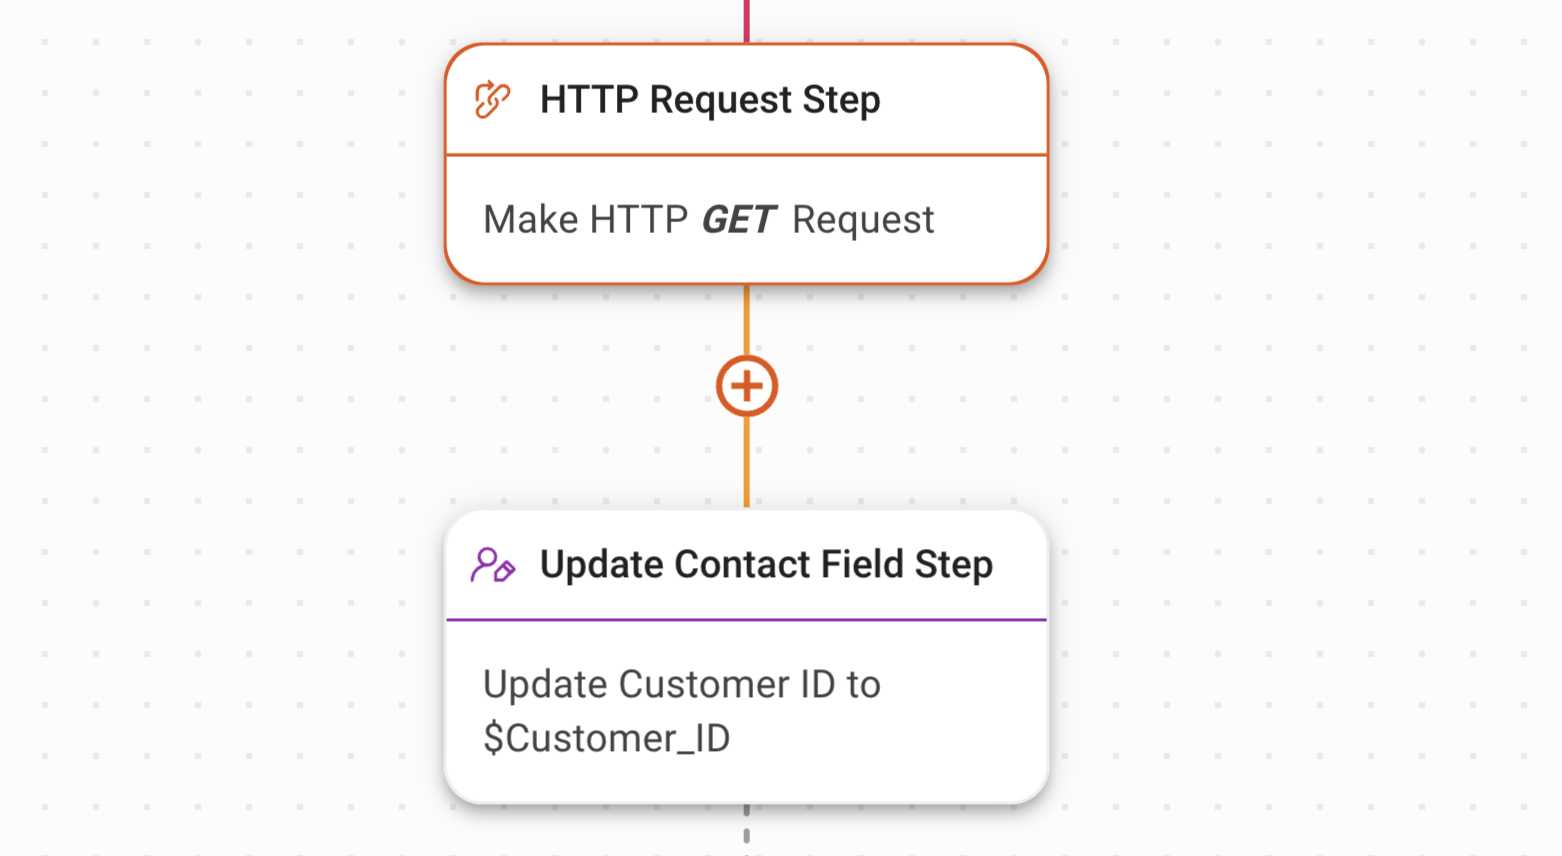 use an HTTP Request to retrieve one field from an external CRM